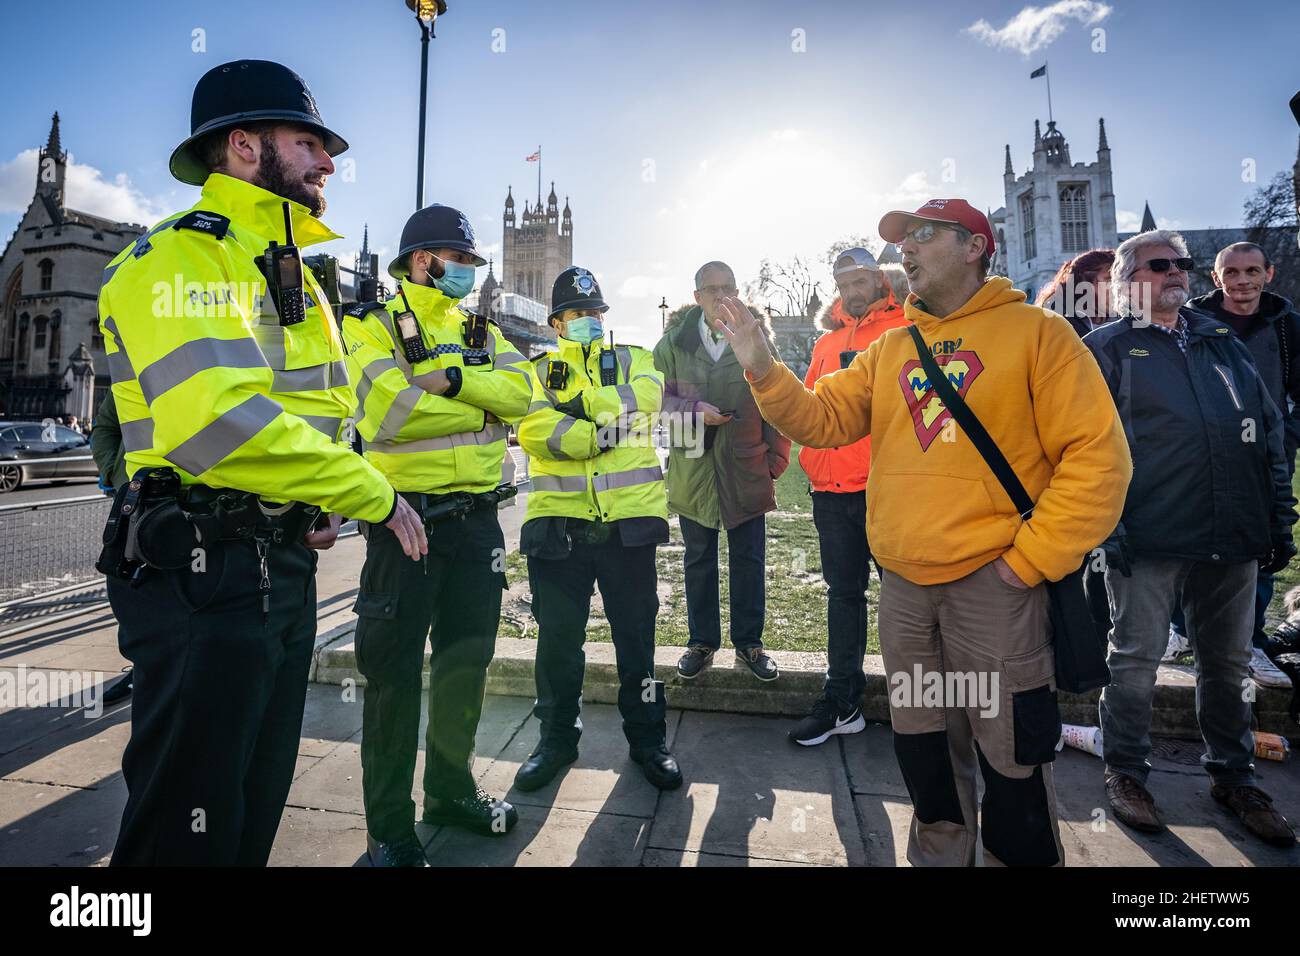 Anti-vax activist, Geza Tarjanyi, argues with police during an organised anti-vax protest in Westminster criticising the Covid vaccine roll-out. Stock Photo